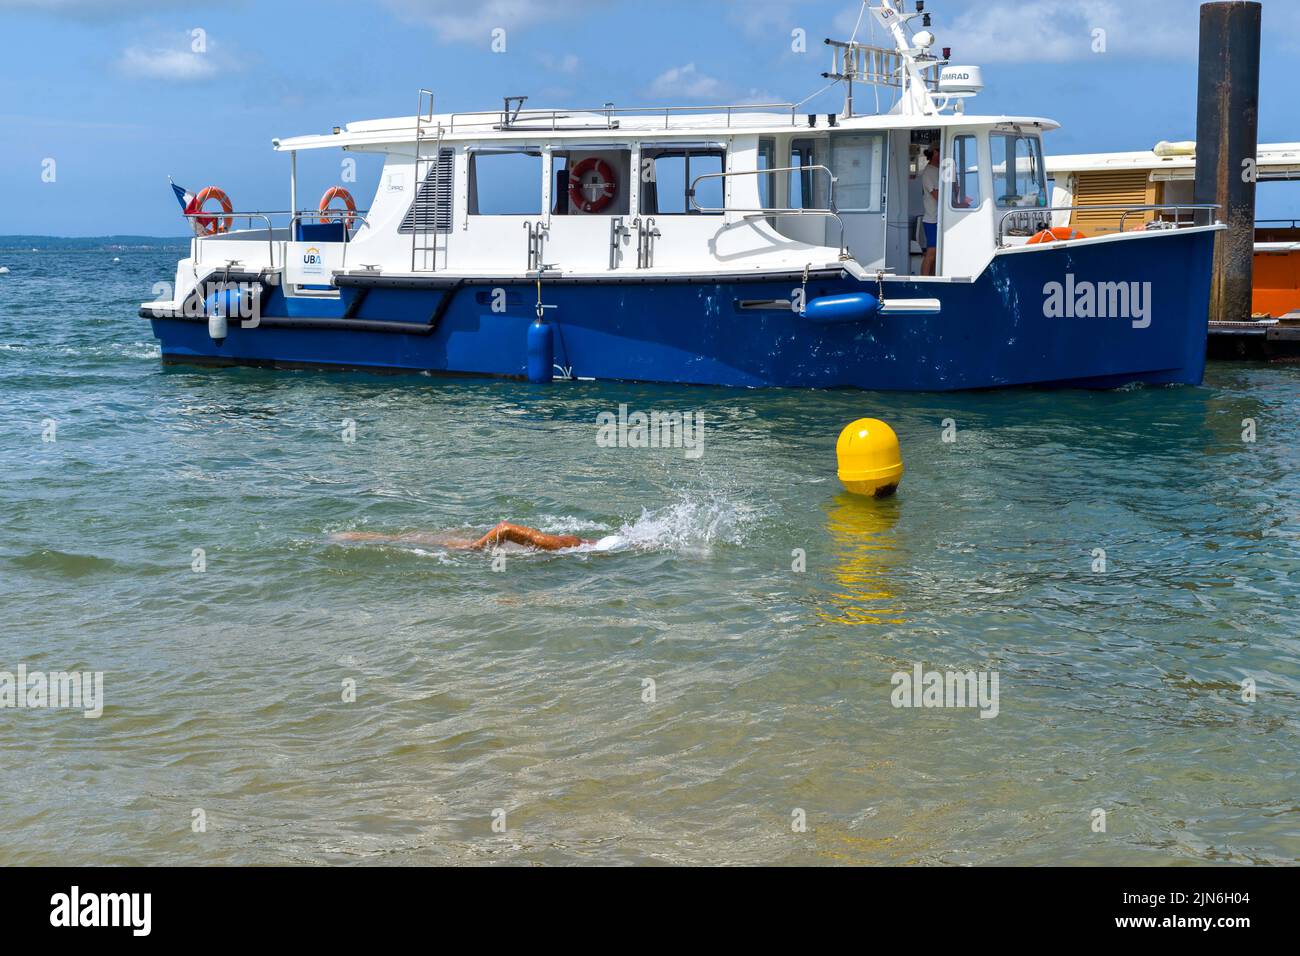 A man swims in front of a cab boat. Arcachon beach, the Belisaire pier, the embarkations, the lovers, the bathers, a day at the beach. August 04, 2022. Photo by Patricia Huchot-Boissier/ABACAPRESS.COM Stock Photo